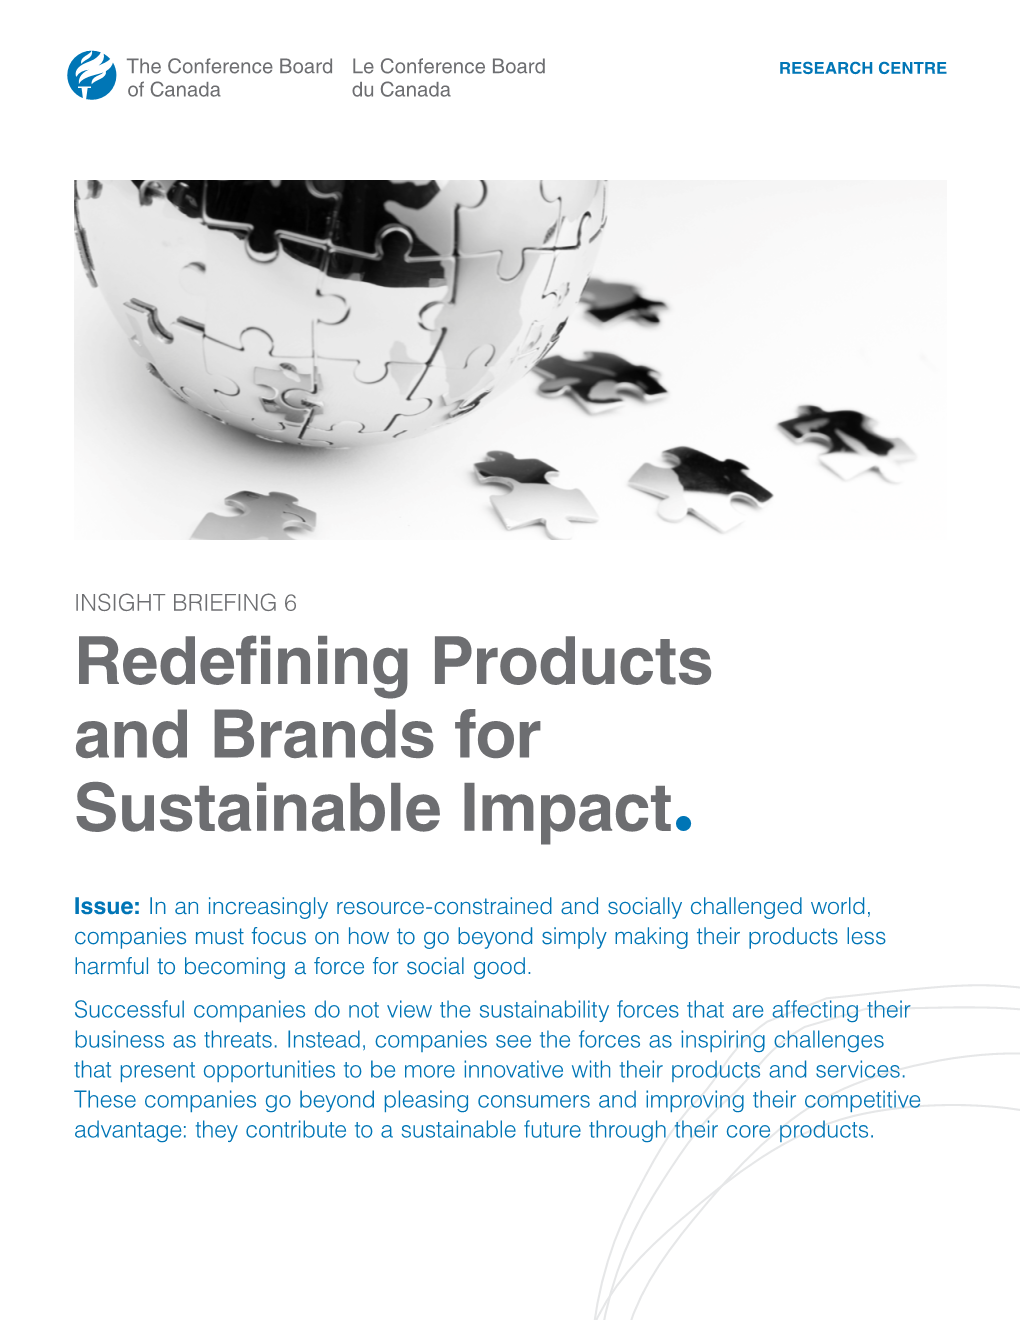 Redefining Products and Brands for Sustainable Impact